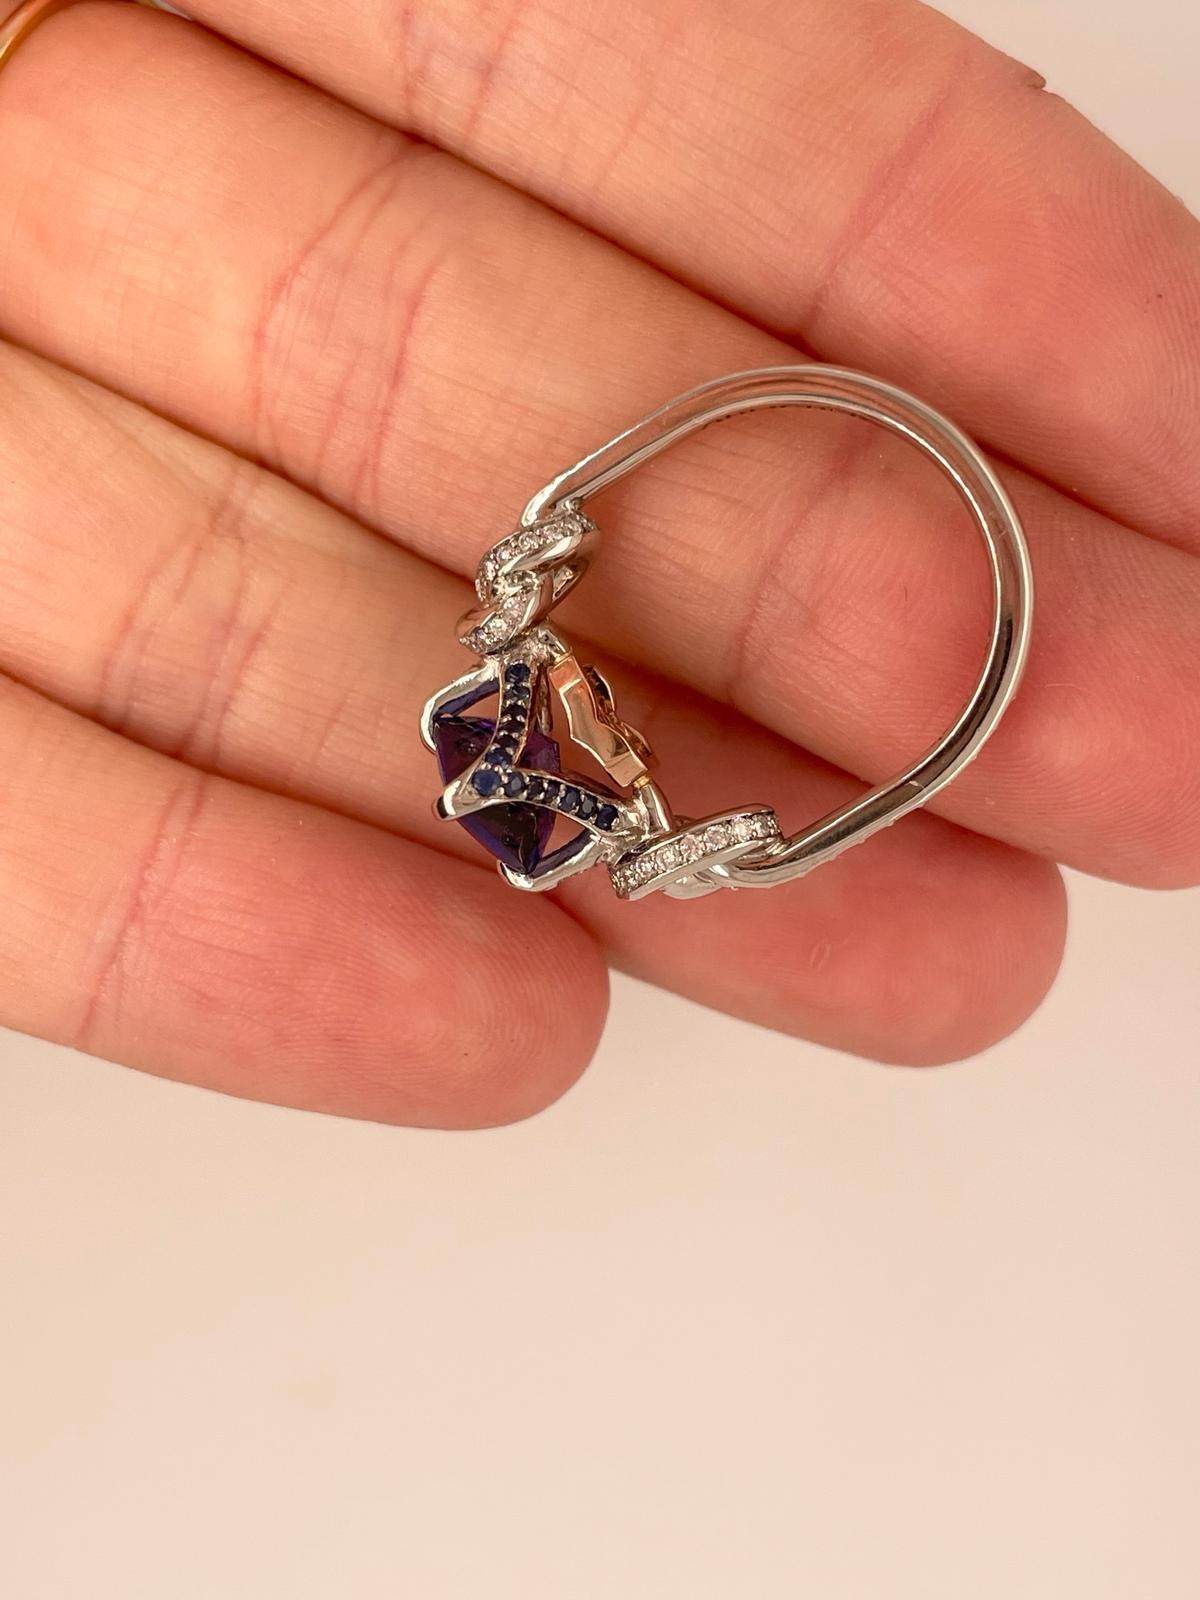 For Sale:  2ct tanzanite and diamond ring in platinum and rose gold  Forget me knot ring  15